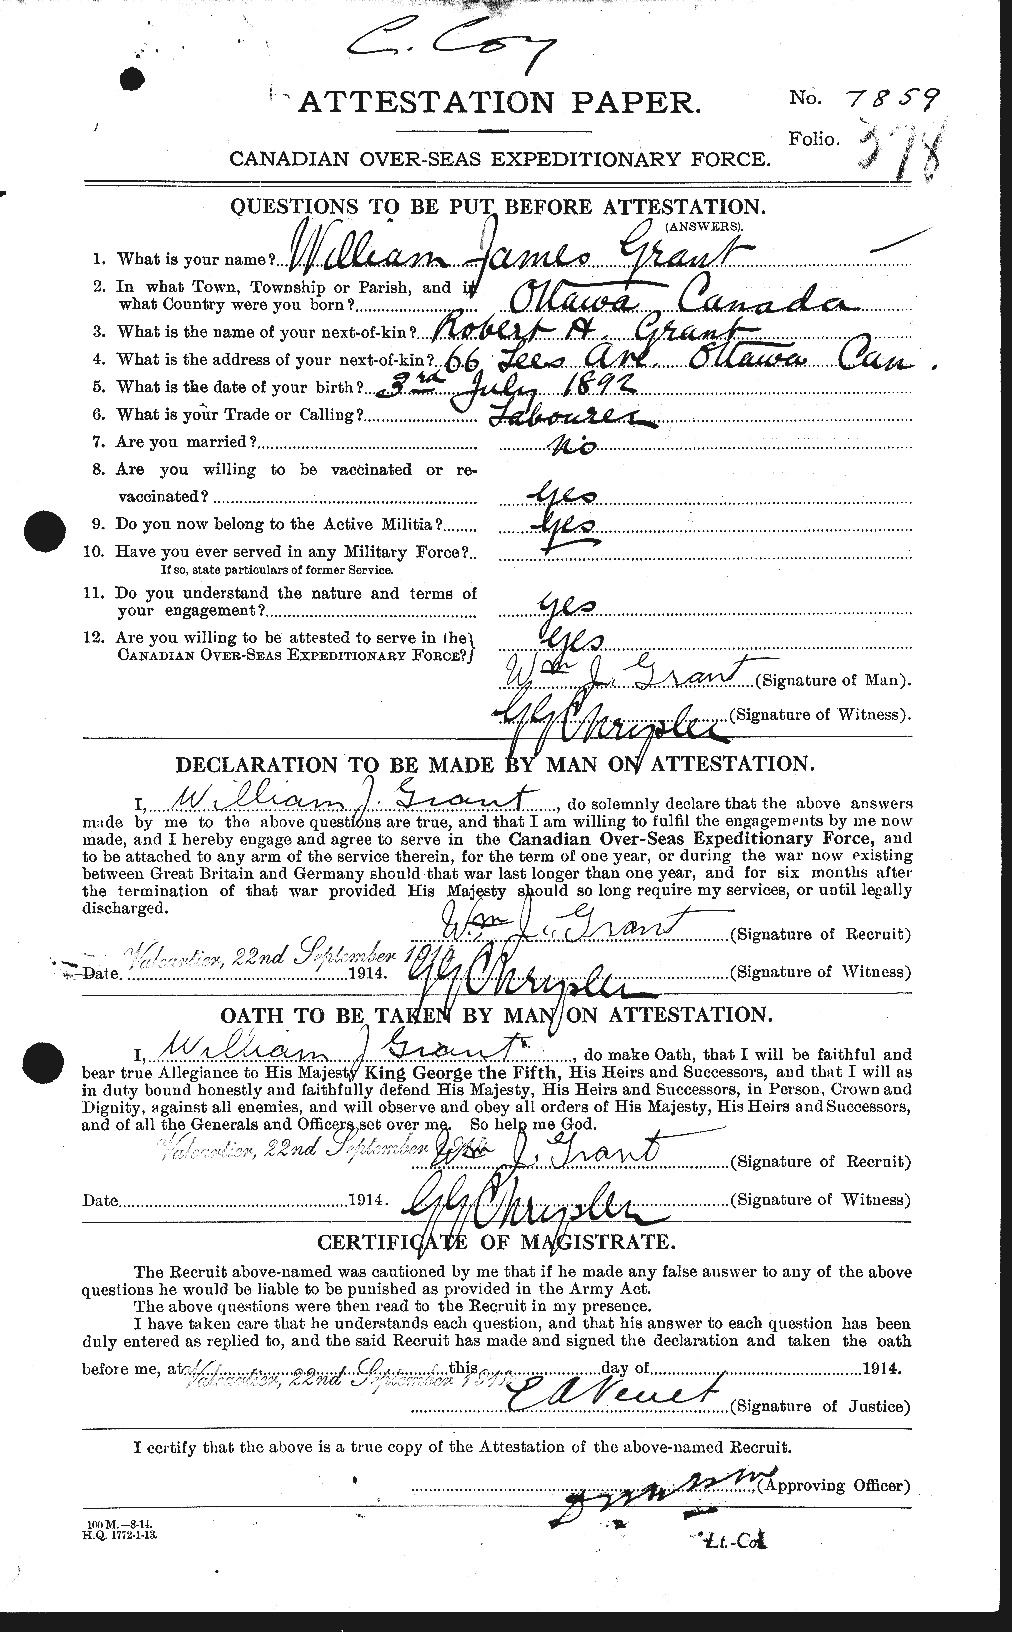 Personnel Records of the First World War - CEF 361270a